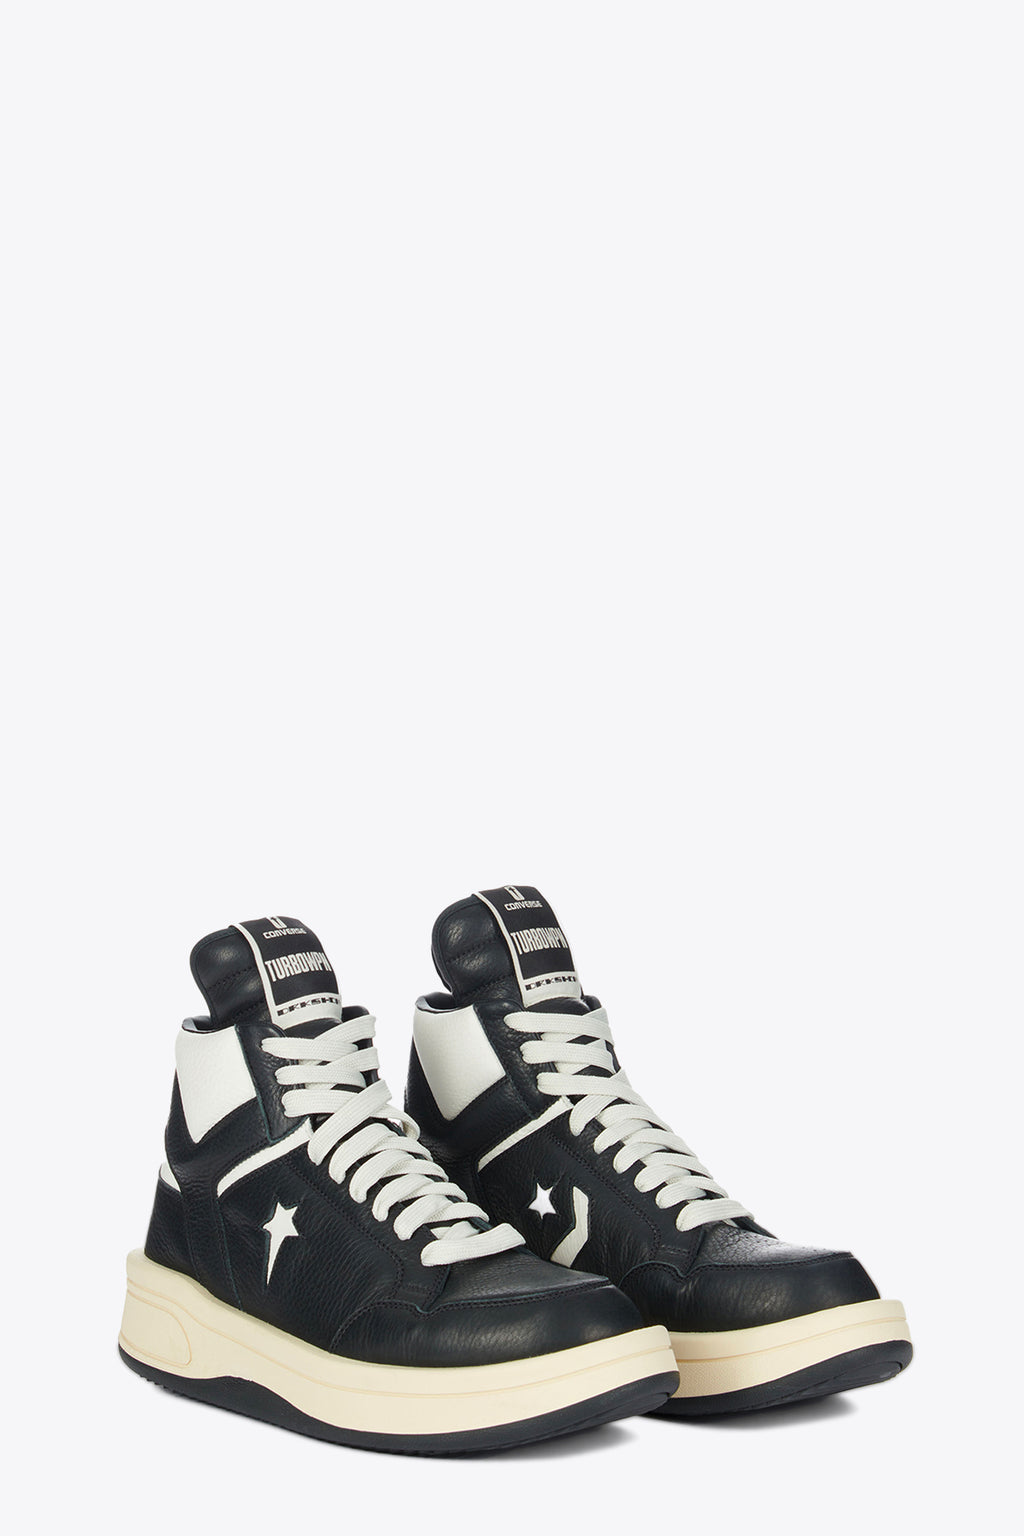 alt-image__Black-and-off-white-leather-basket-sneaker-Converse-collab---Turbowpn-